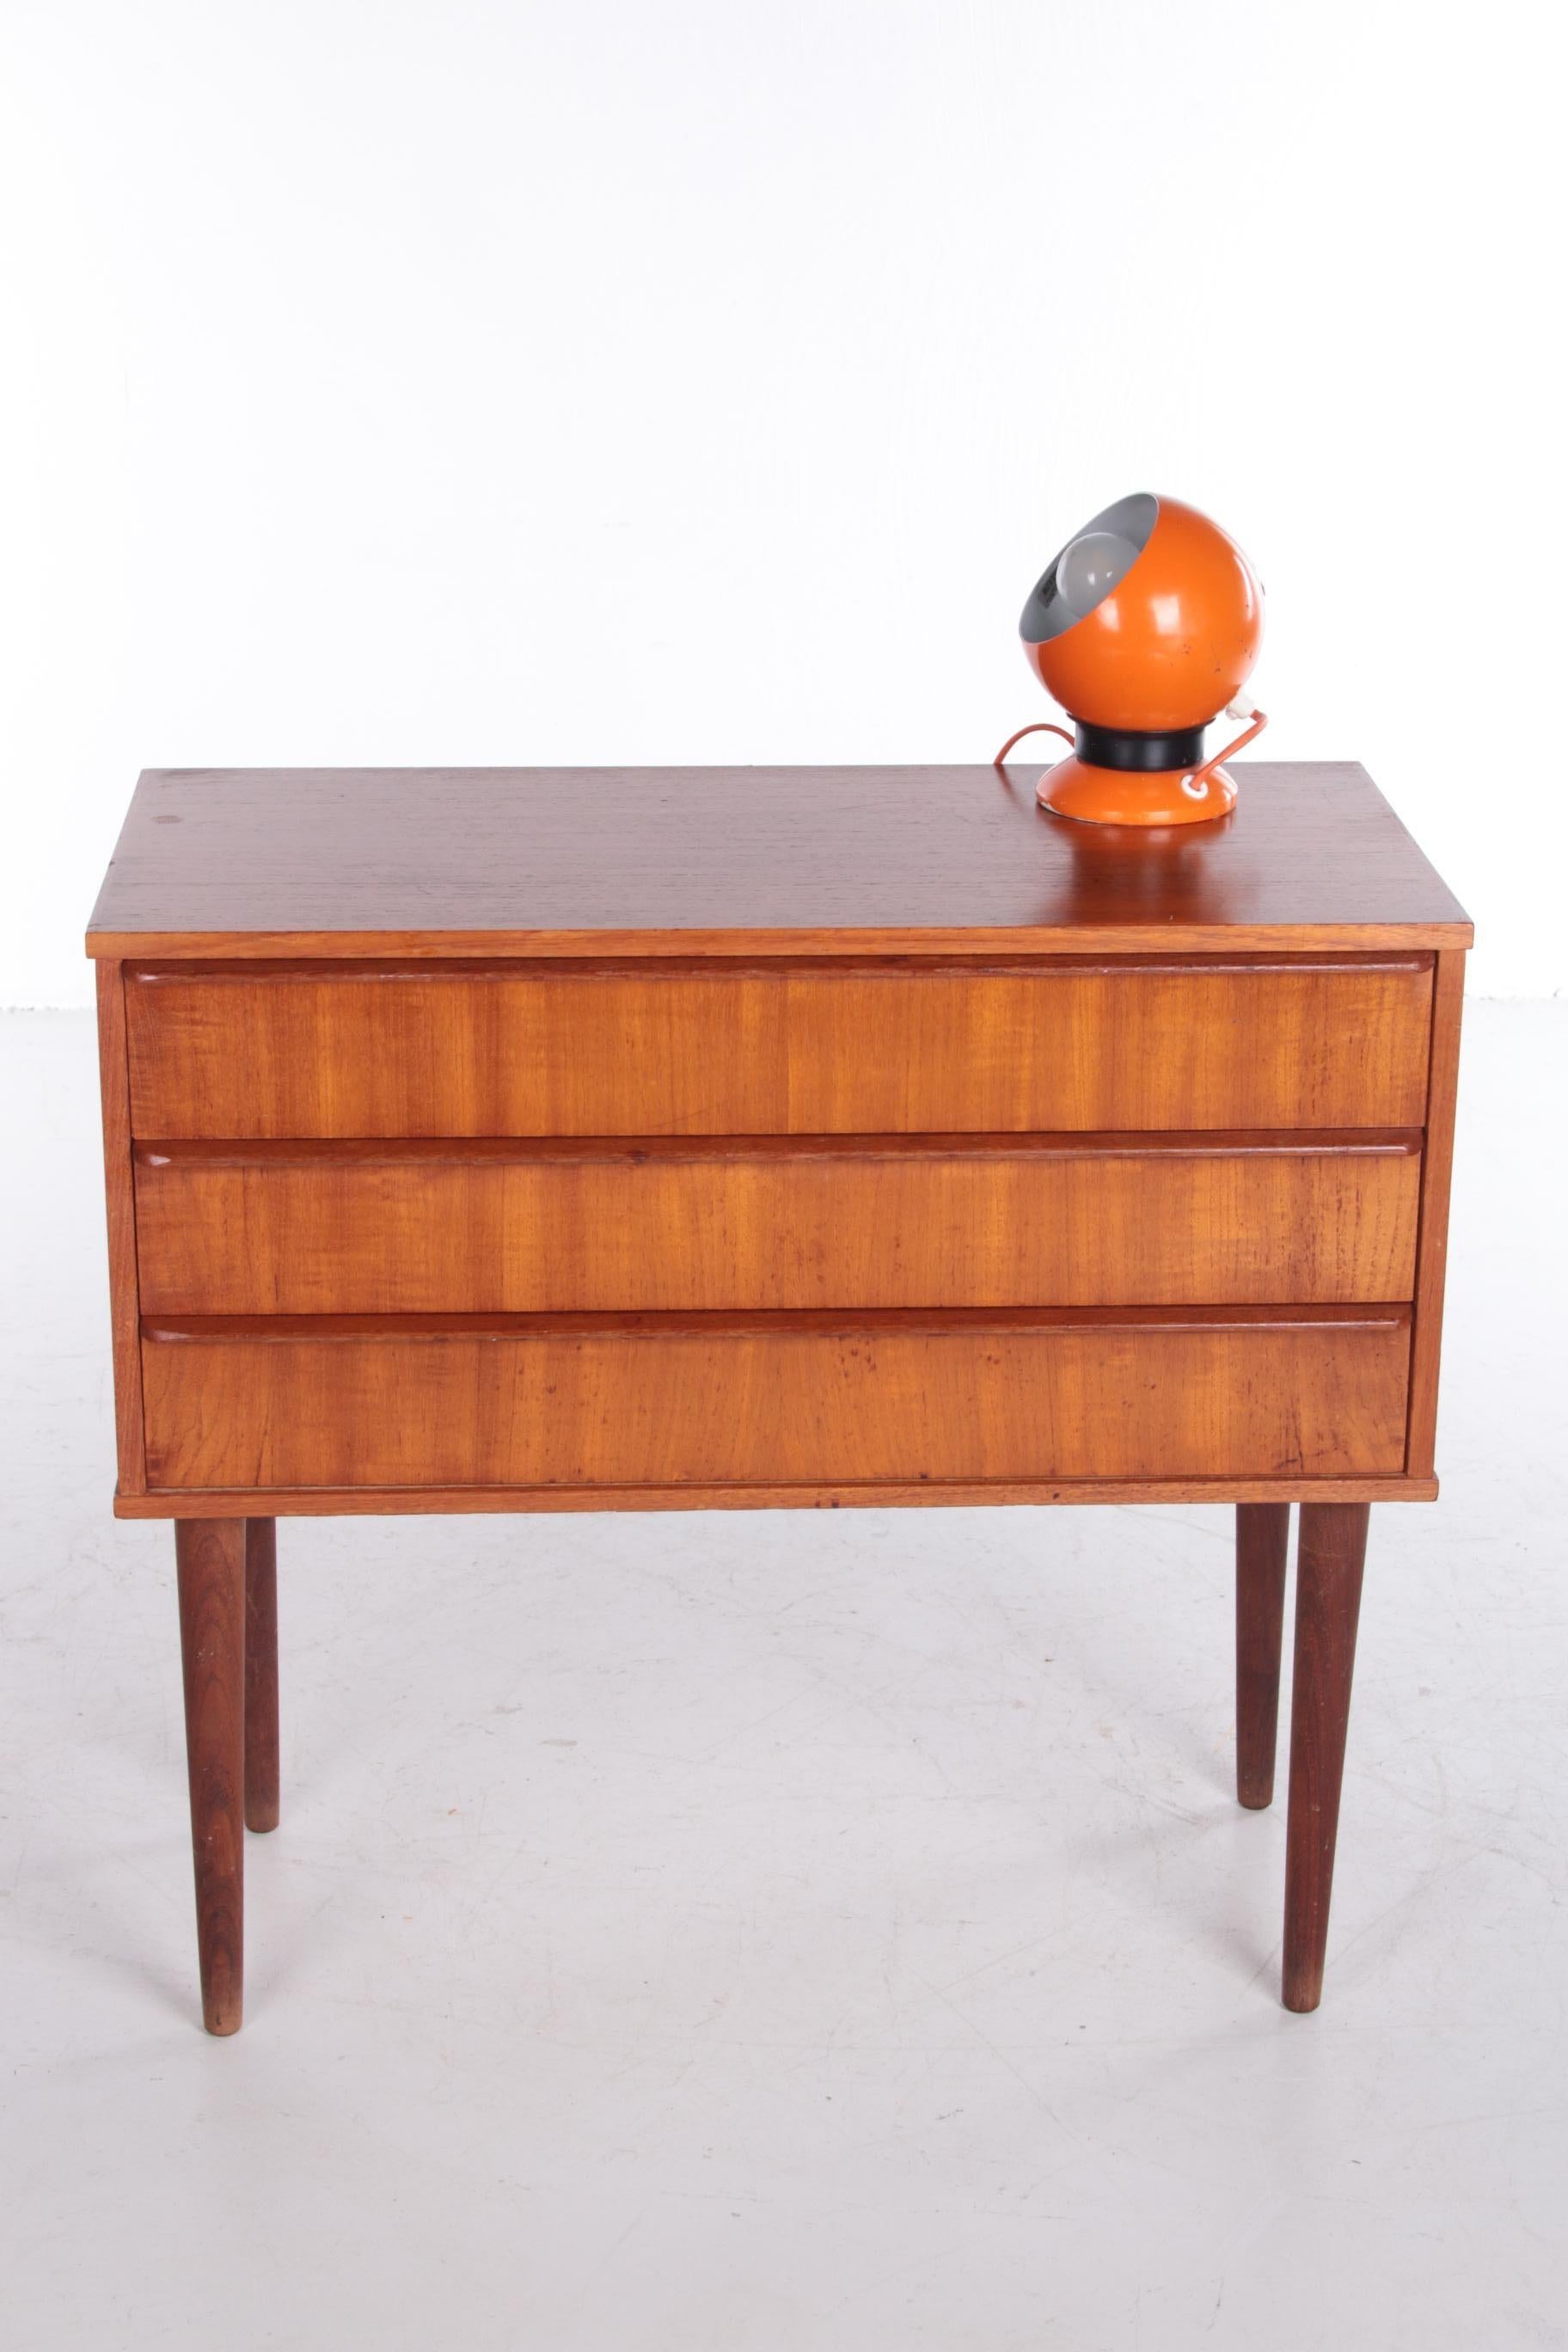 A beautiful designer chest of drawers from Denmark made of teak. The case was probably produced around the 1960s.

This cabinet has three drawers for quick storage of all your belongings. The handles on the drawers have an interesting elongated